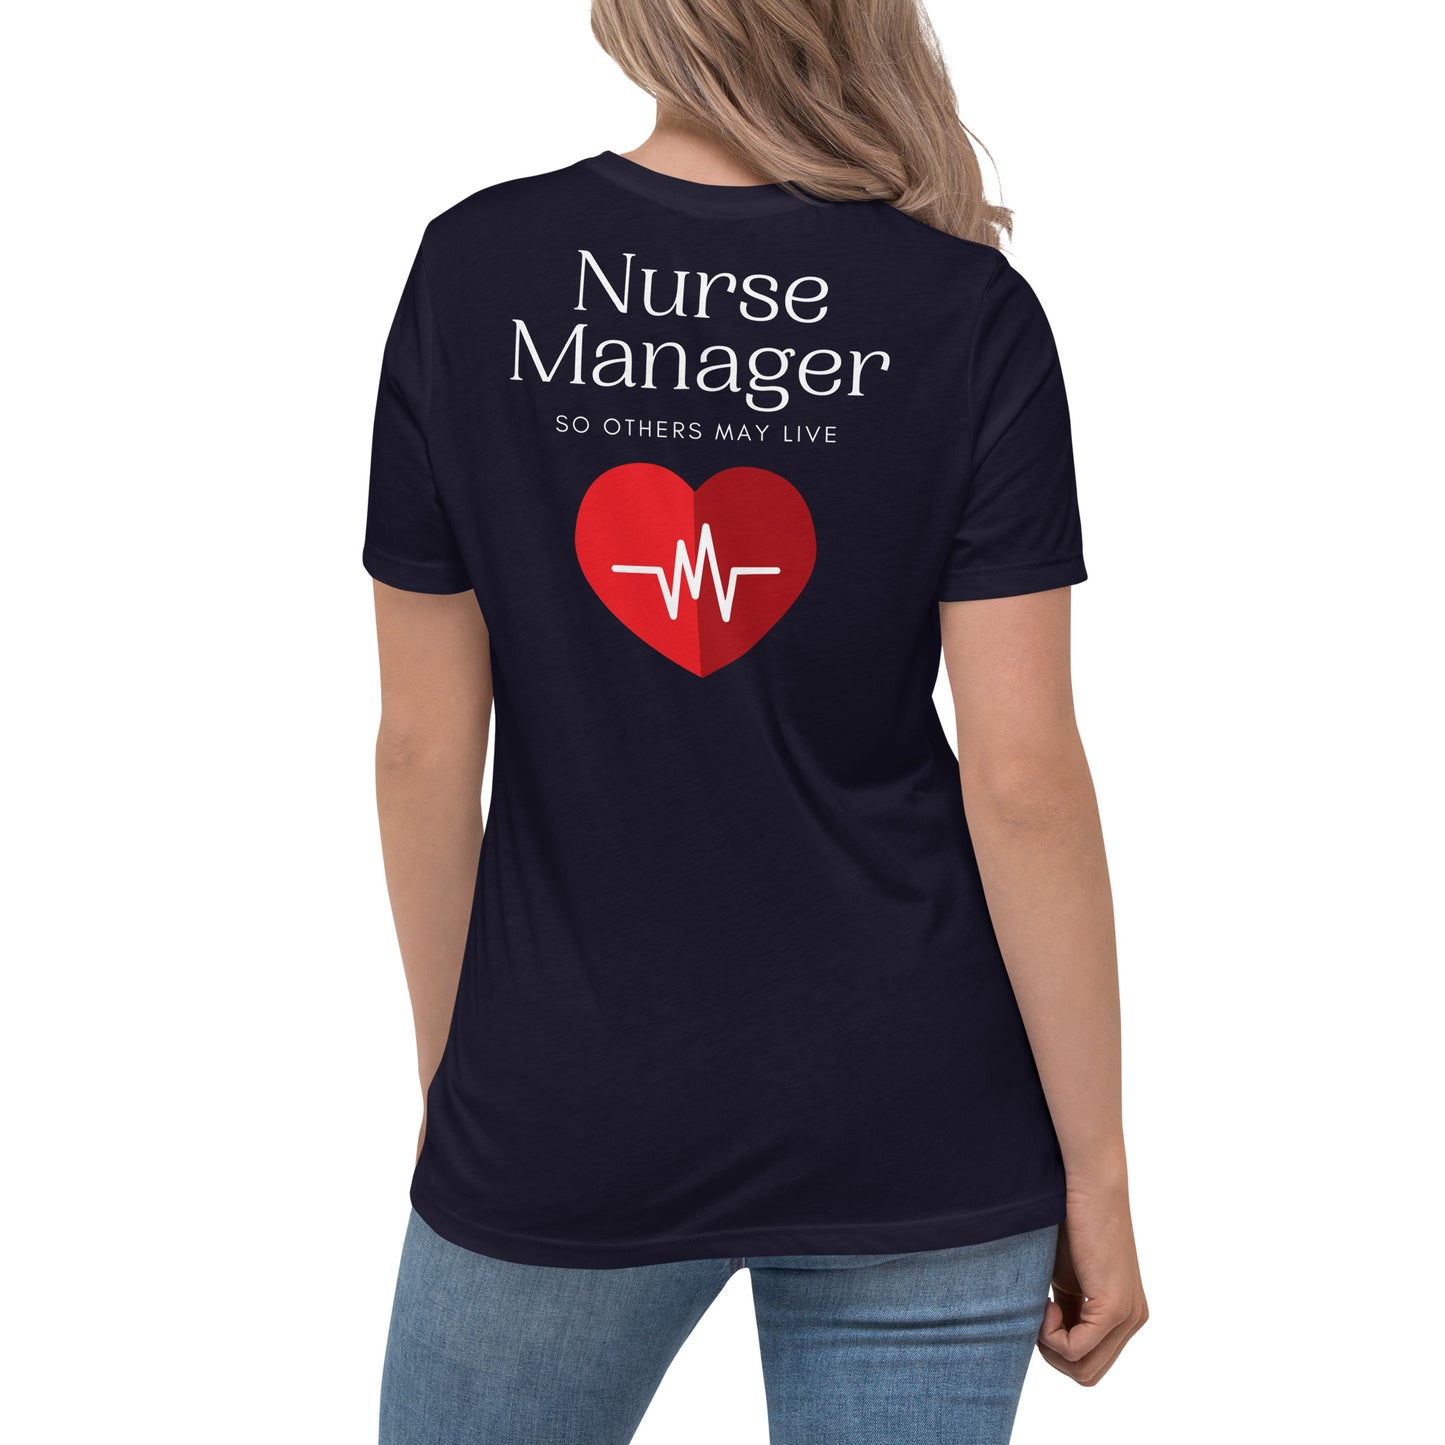 Nurse Manager , So Others May Live Women's Relaxed T-Shirt